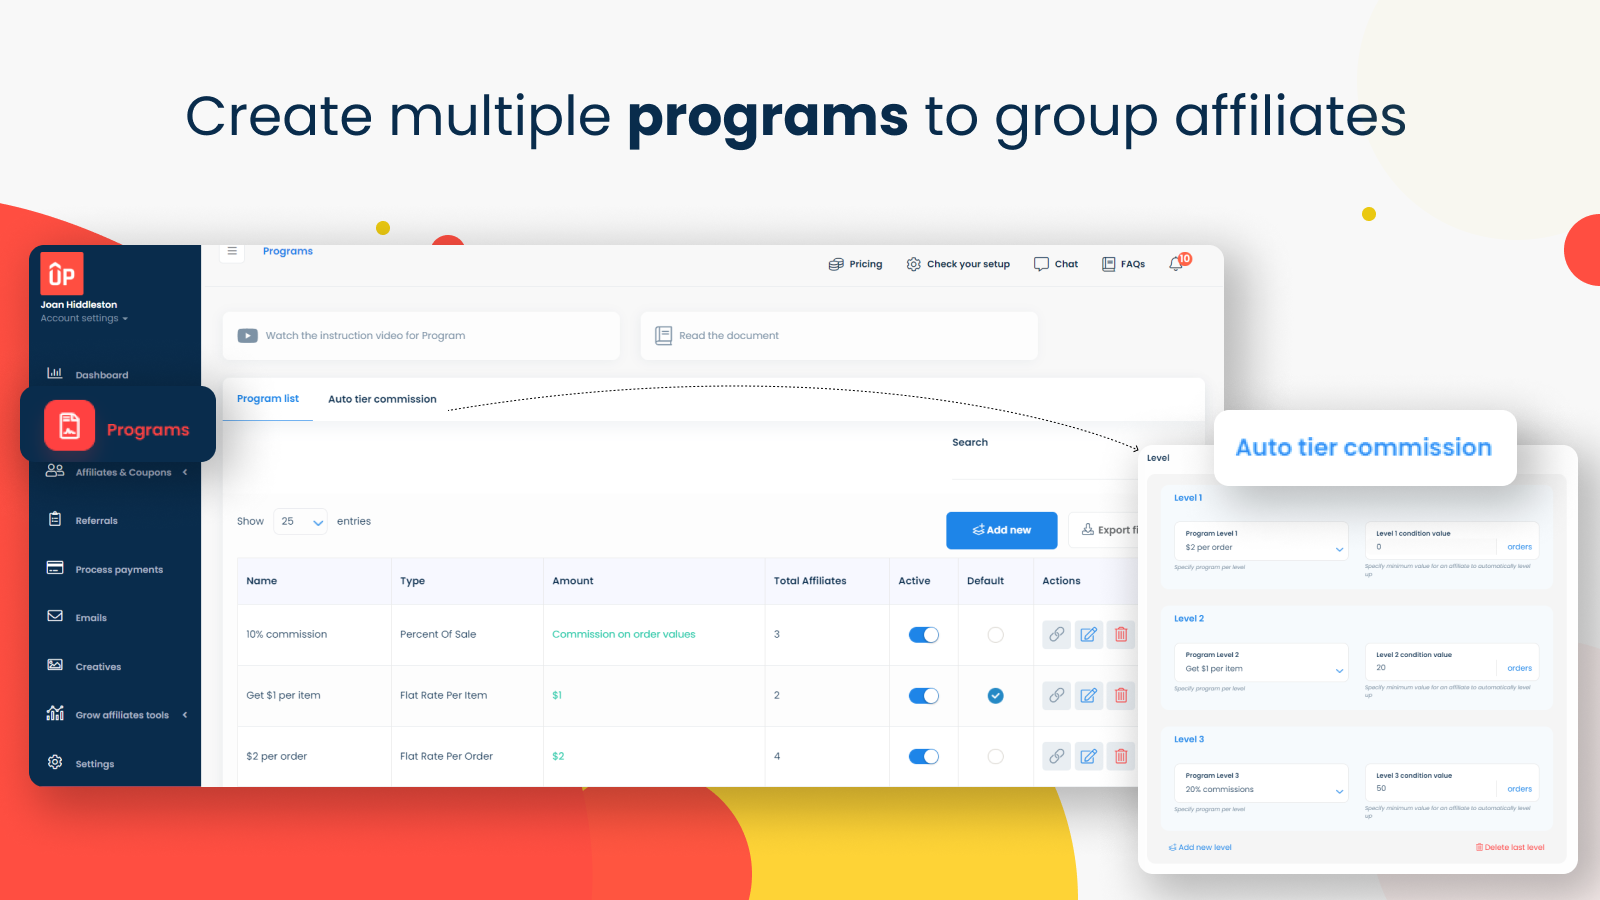 Create multiple programs to group affiliates